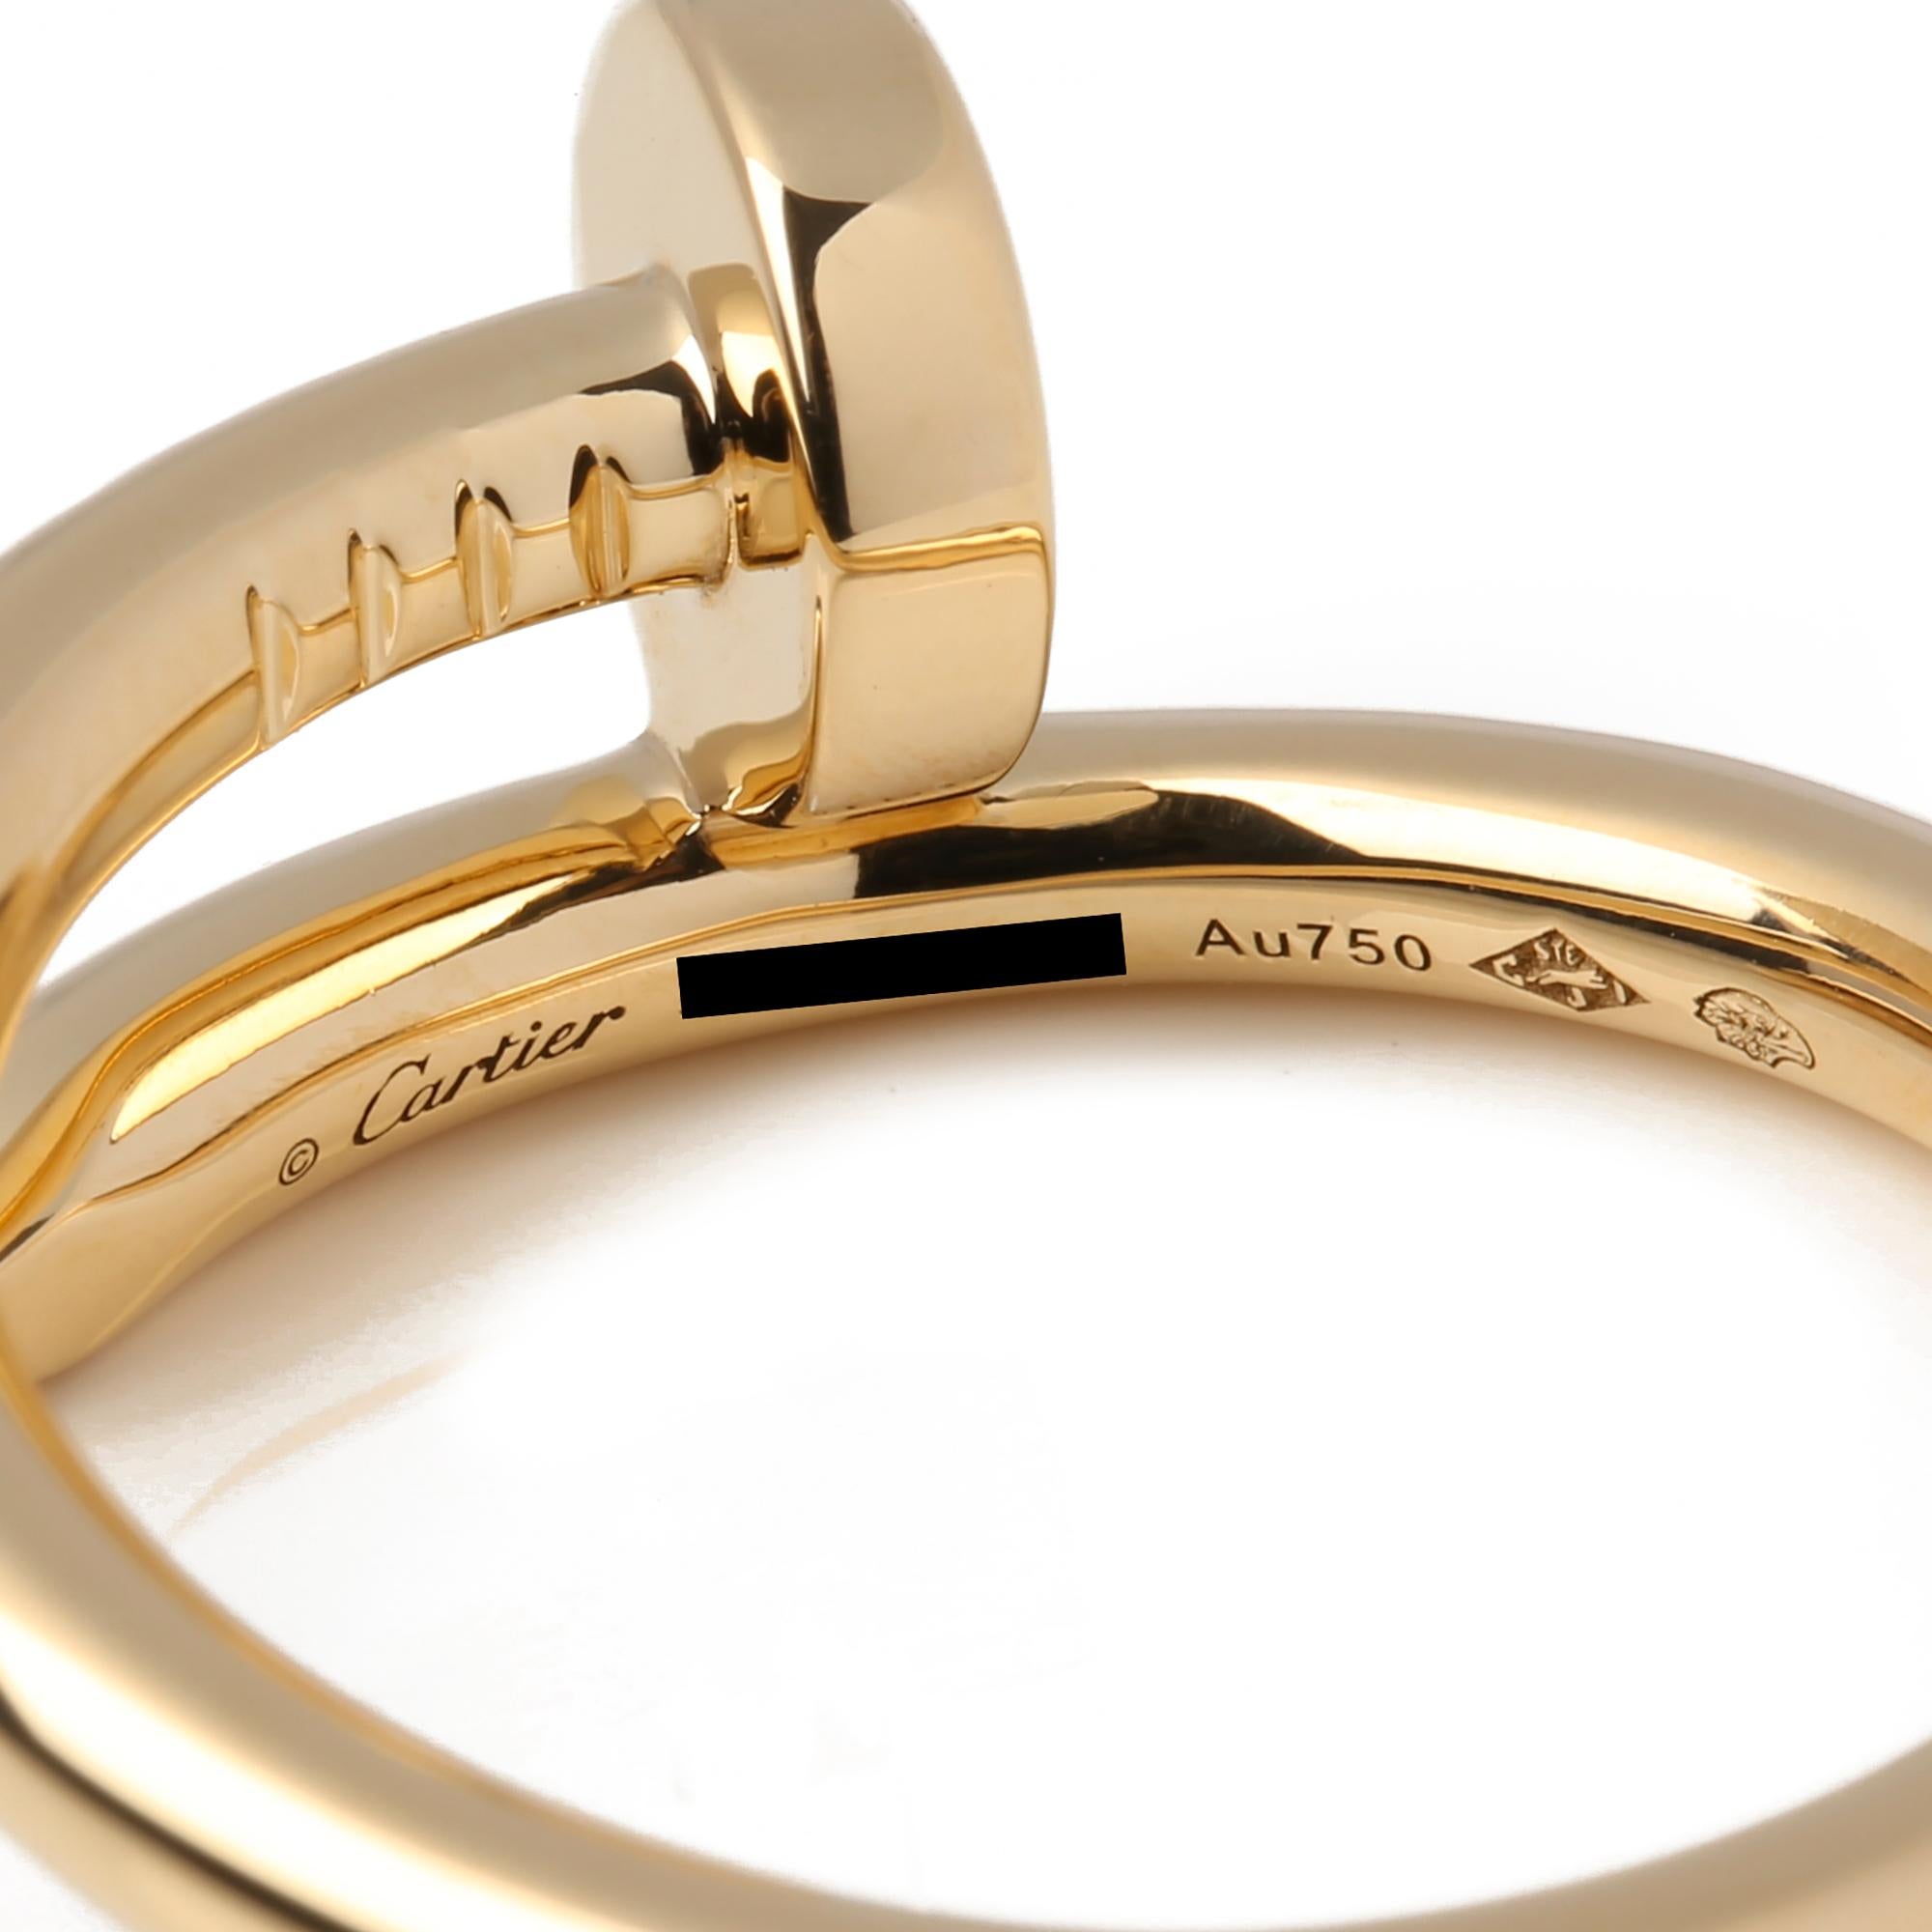 This ring from Cartier is from their Just en Clou collection and features their signature nail design, made in 18ct yellow gold. UK ring size P. EU ring size 57. US ring size 7 1/2. Accompanied with it's original Cartier box and certificate. Our